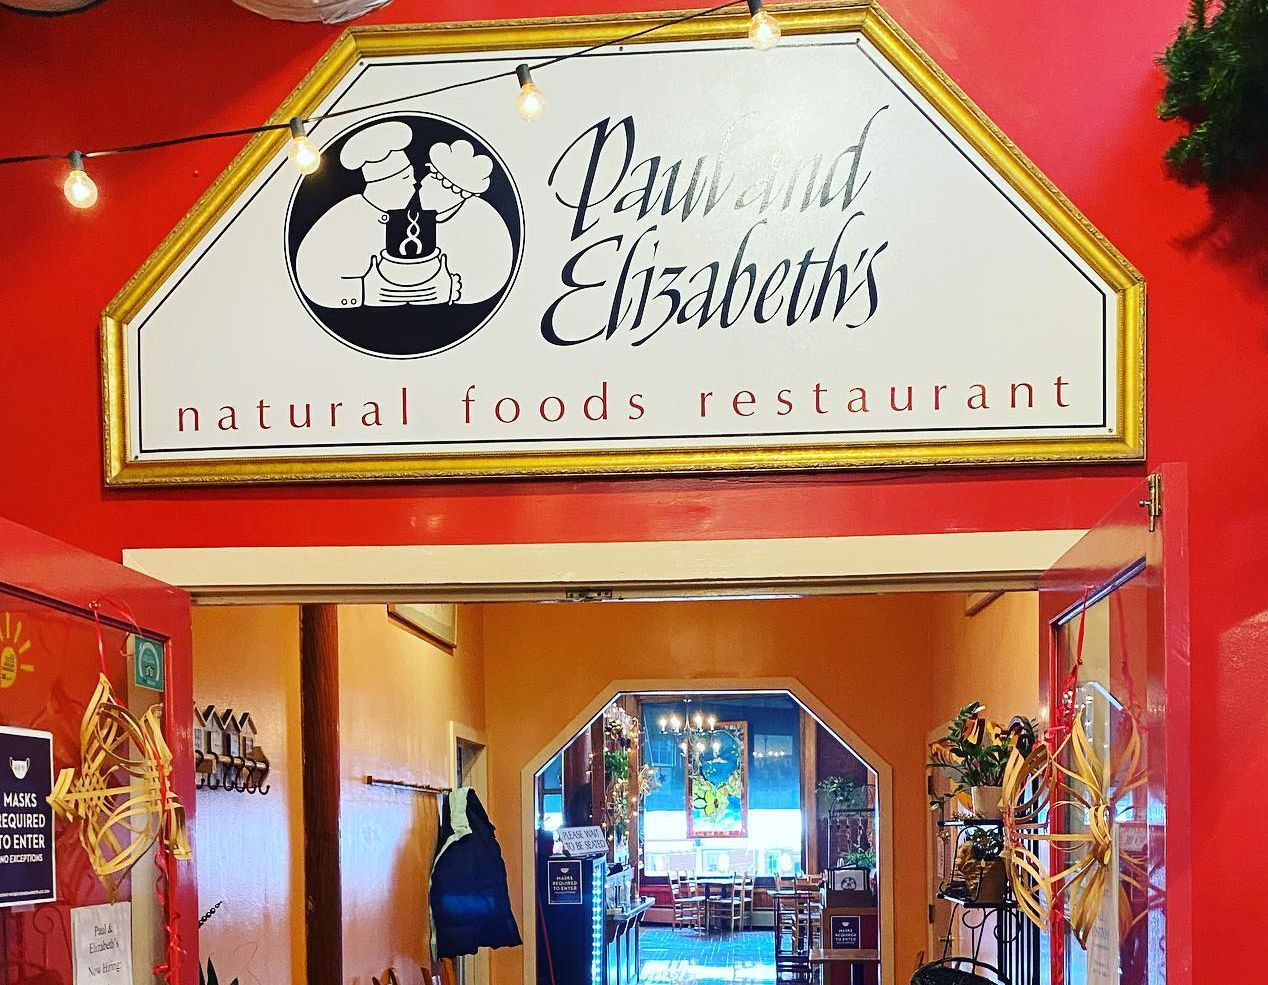 Paul & Elizabeth's is a natural foods restaurant located in Thornes Marketplace Northampton MA, specializing in vegetarian dishes, the freshest seafood, and freshly baked rolls.